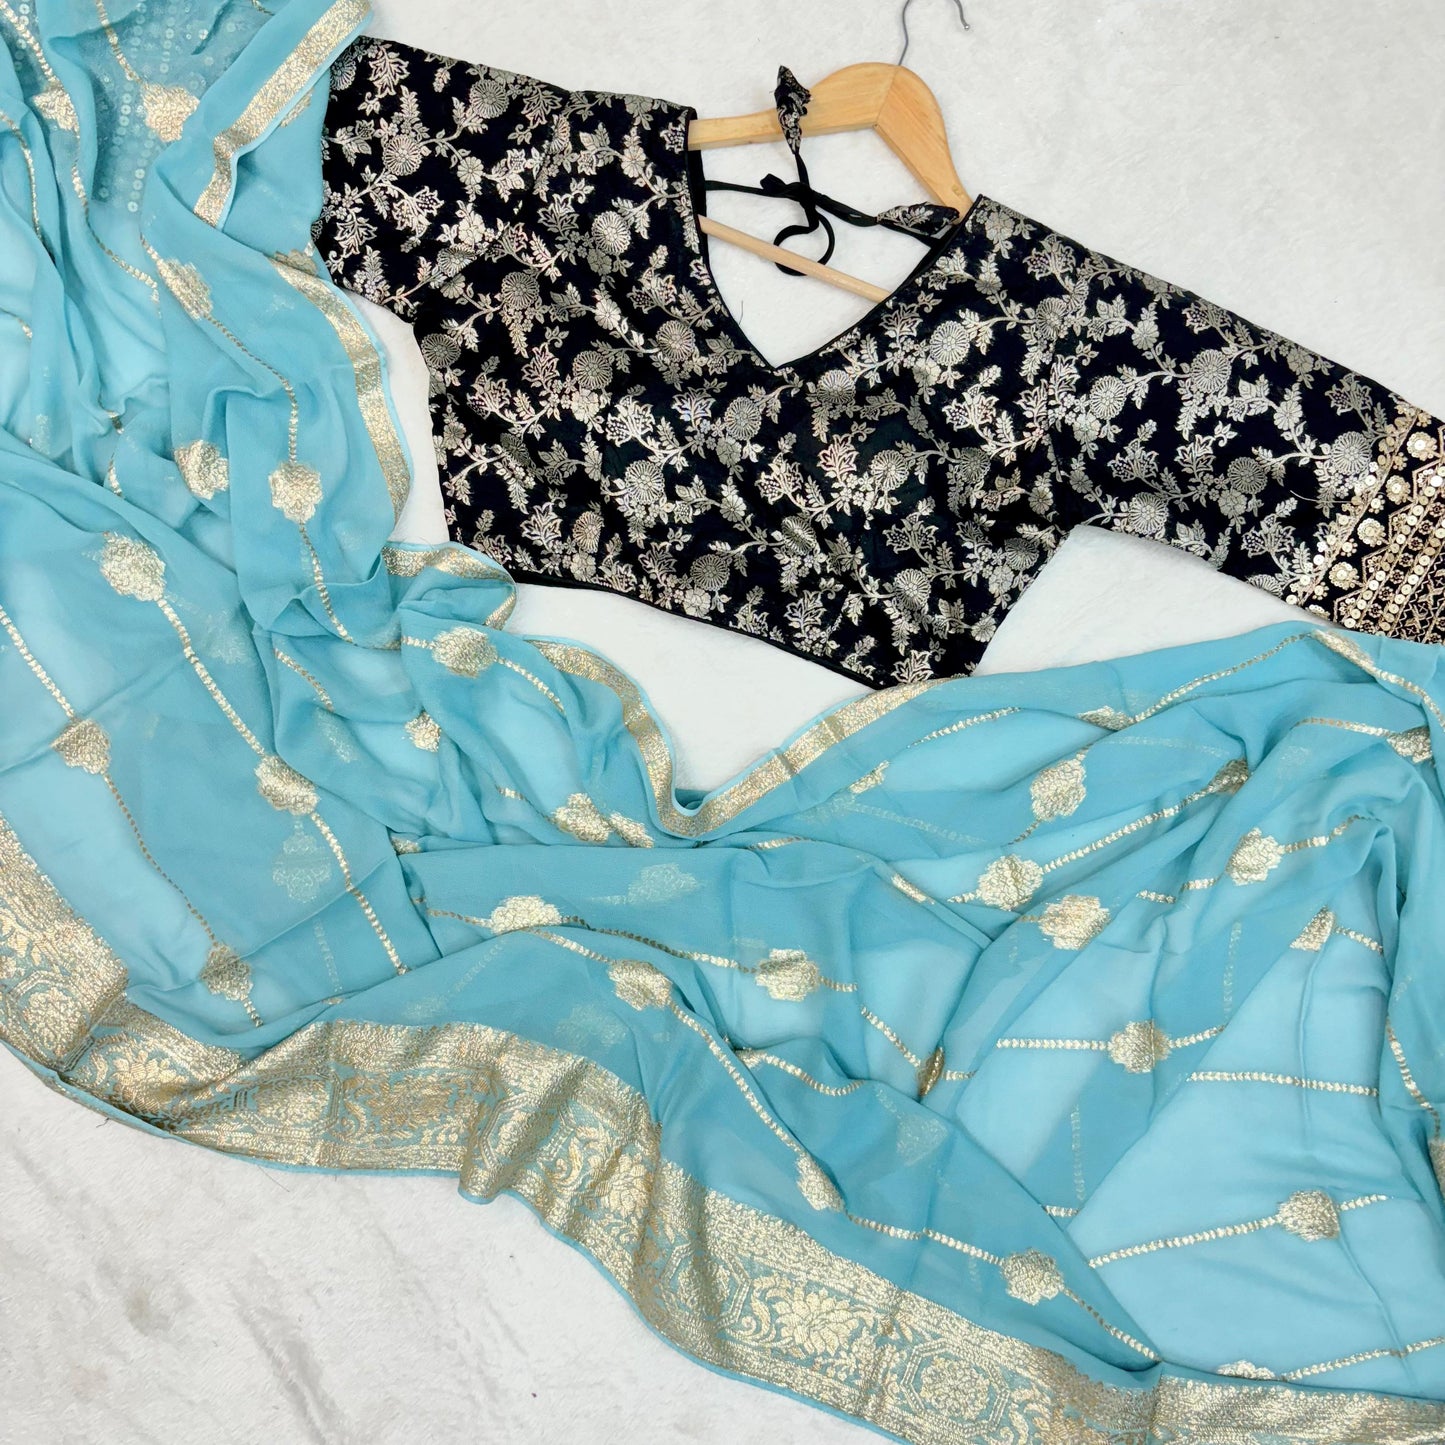 Sky Blue Viscos Georgette Jaqcard Border Saree With Stitched Embroidery Work Blouse